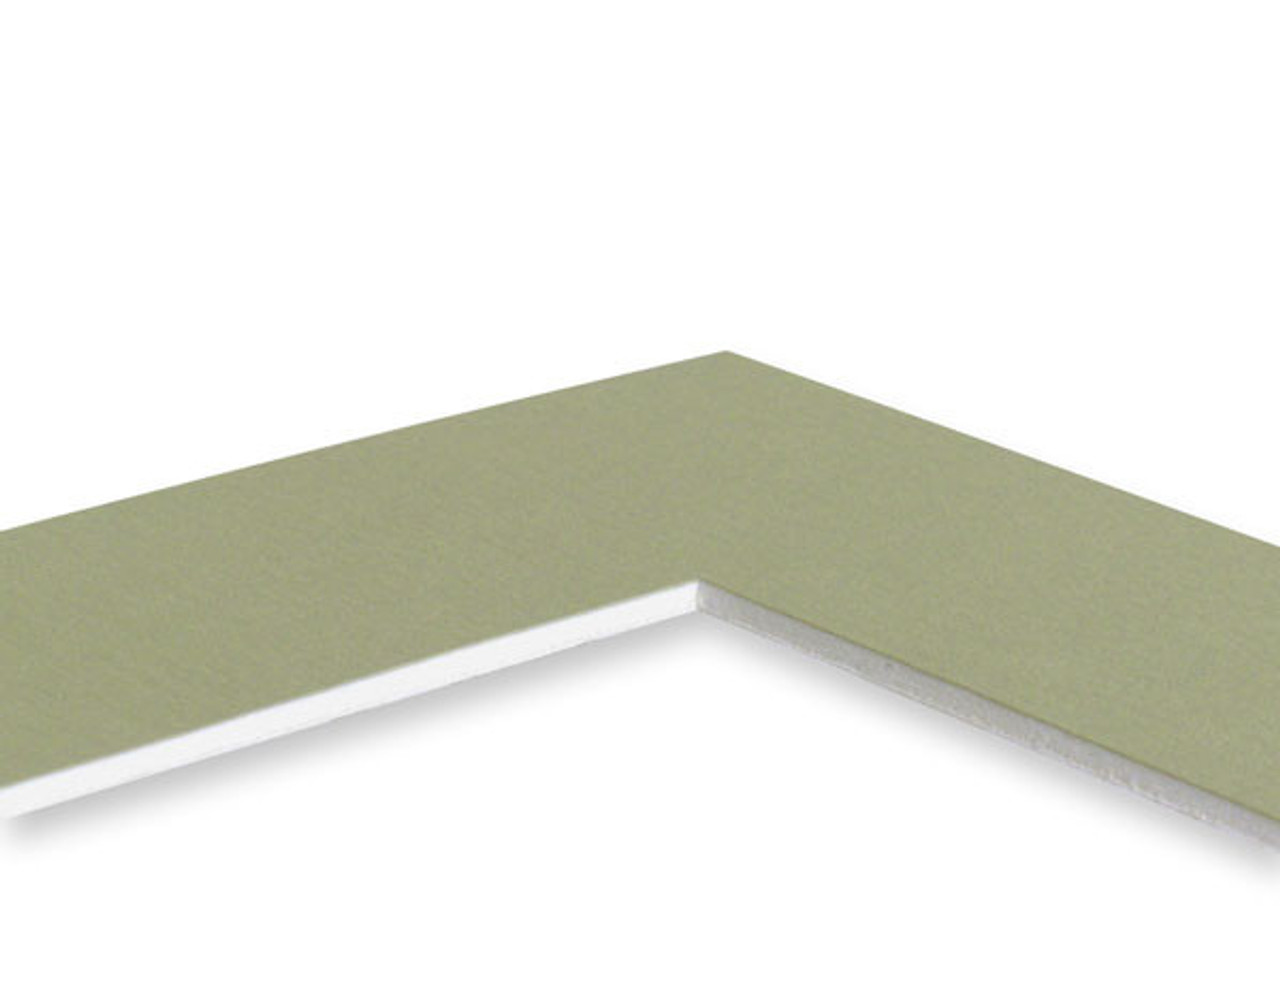 16x20 Single 25 Pack (Standard White Core) -  includes mats, backing, sleeves and tape!